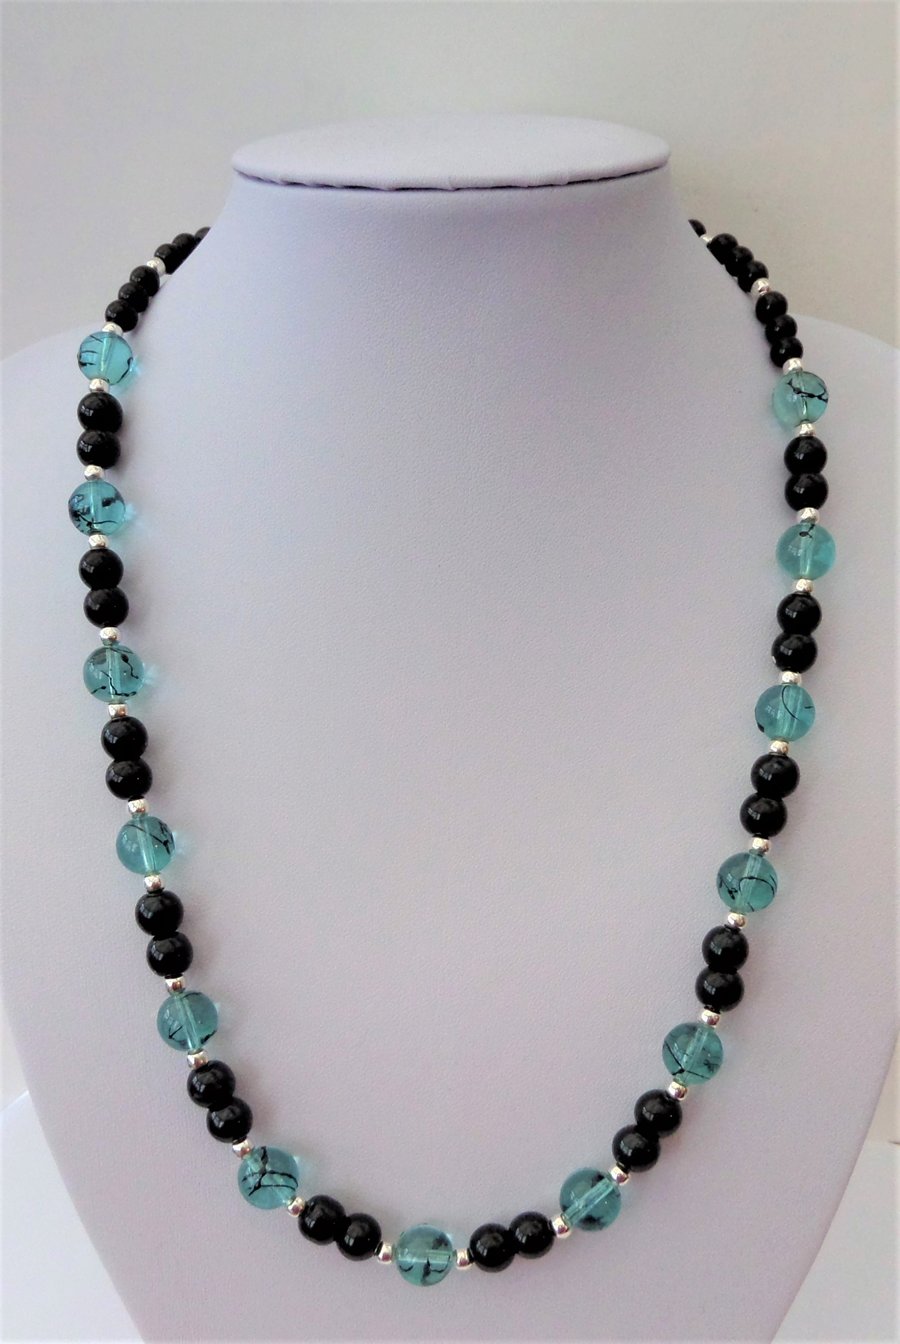 Light blue glass bead and black glass pearl necklace